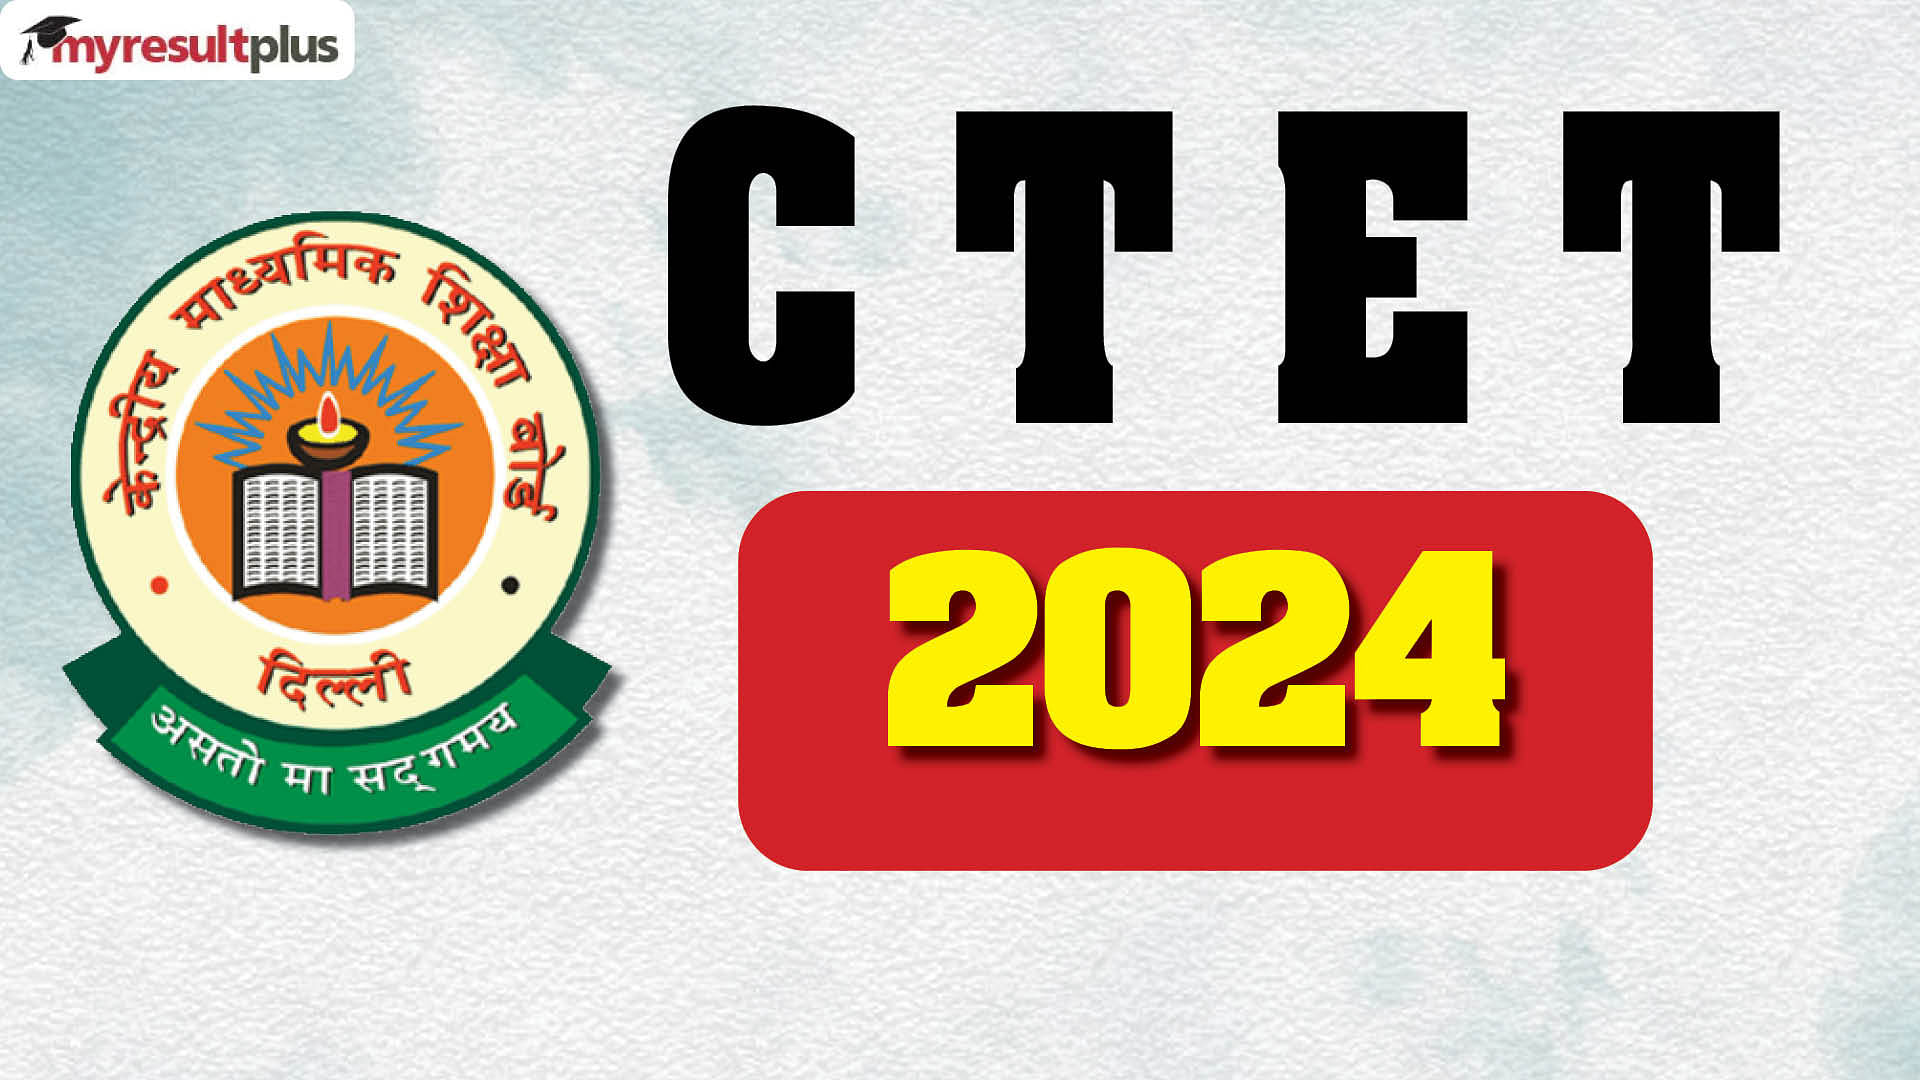 CTET admit card 2024 for July session soon, Check how to download and exam details here